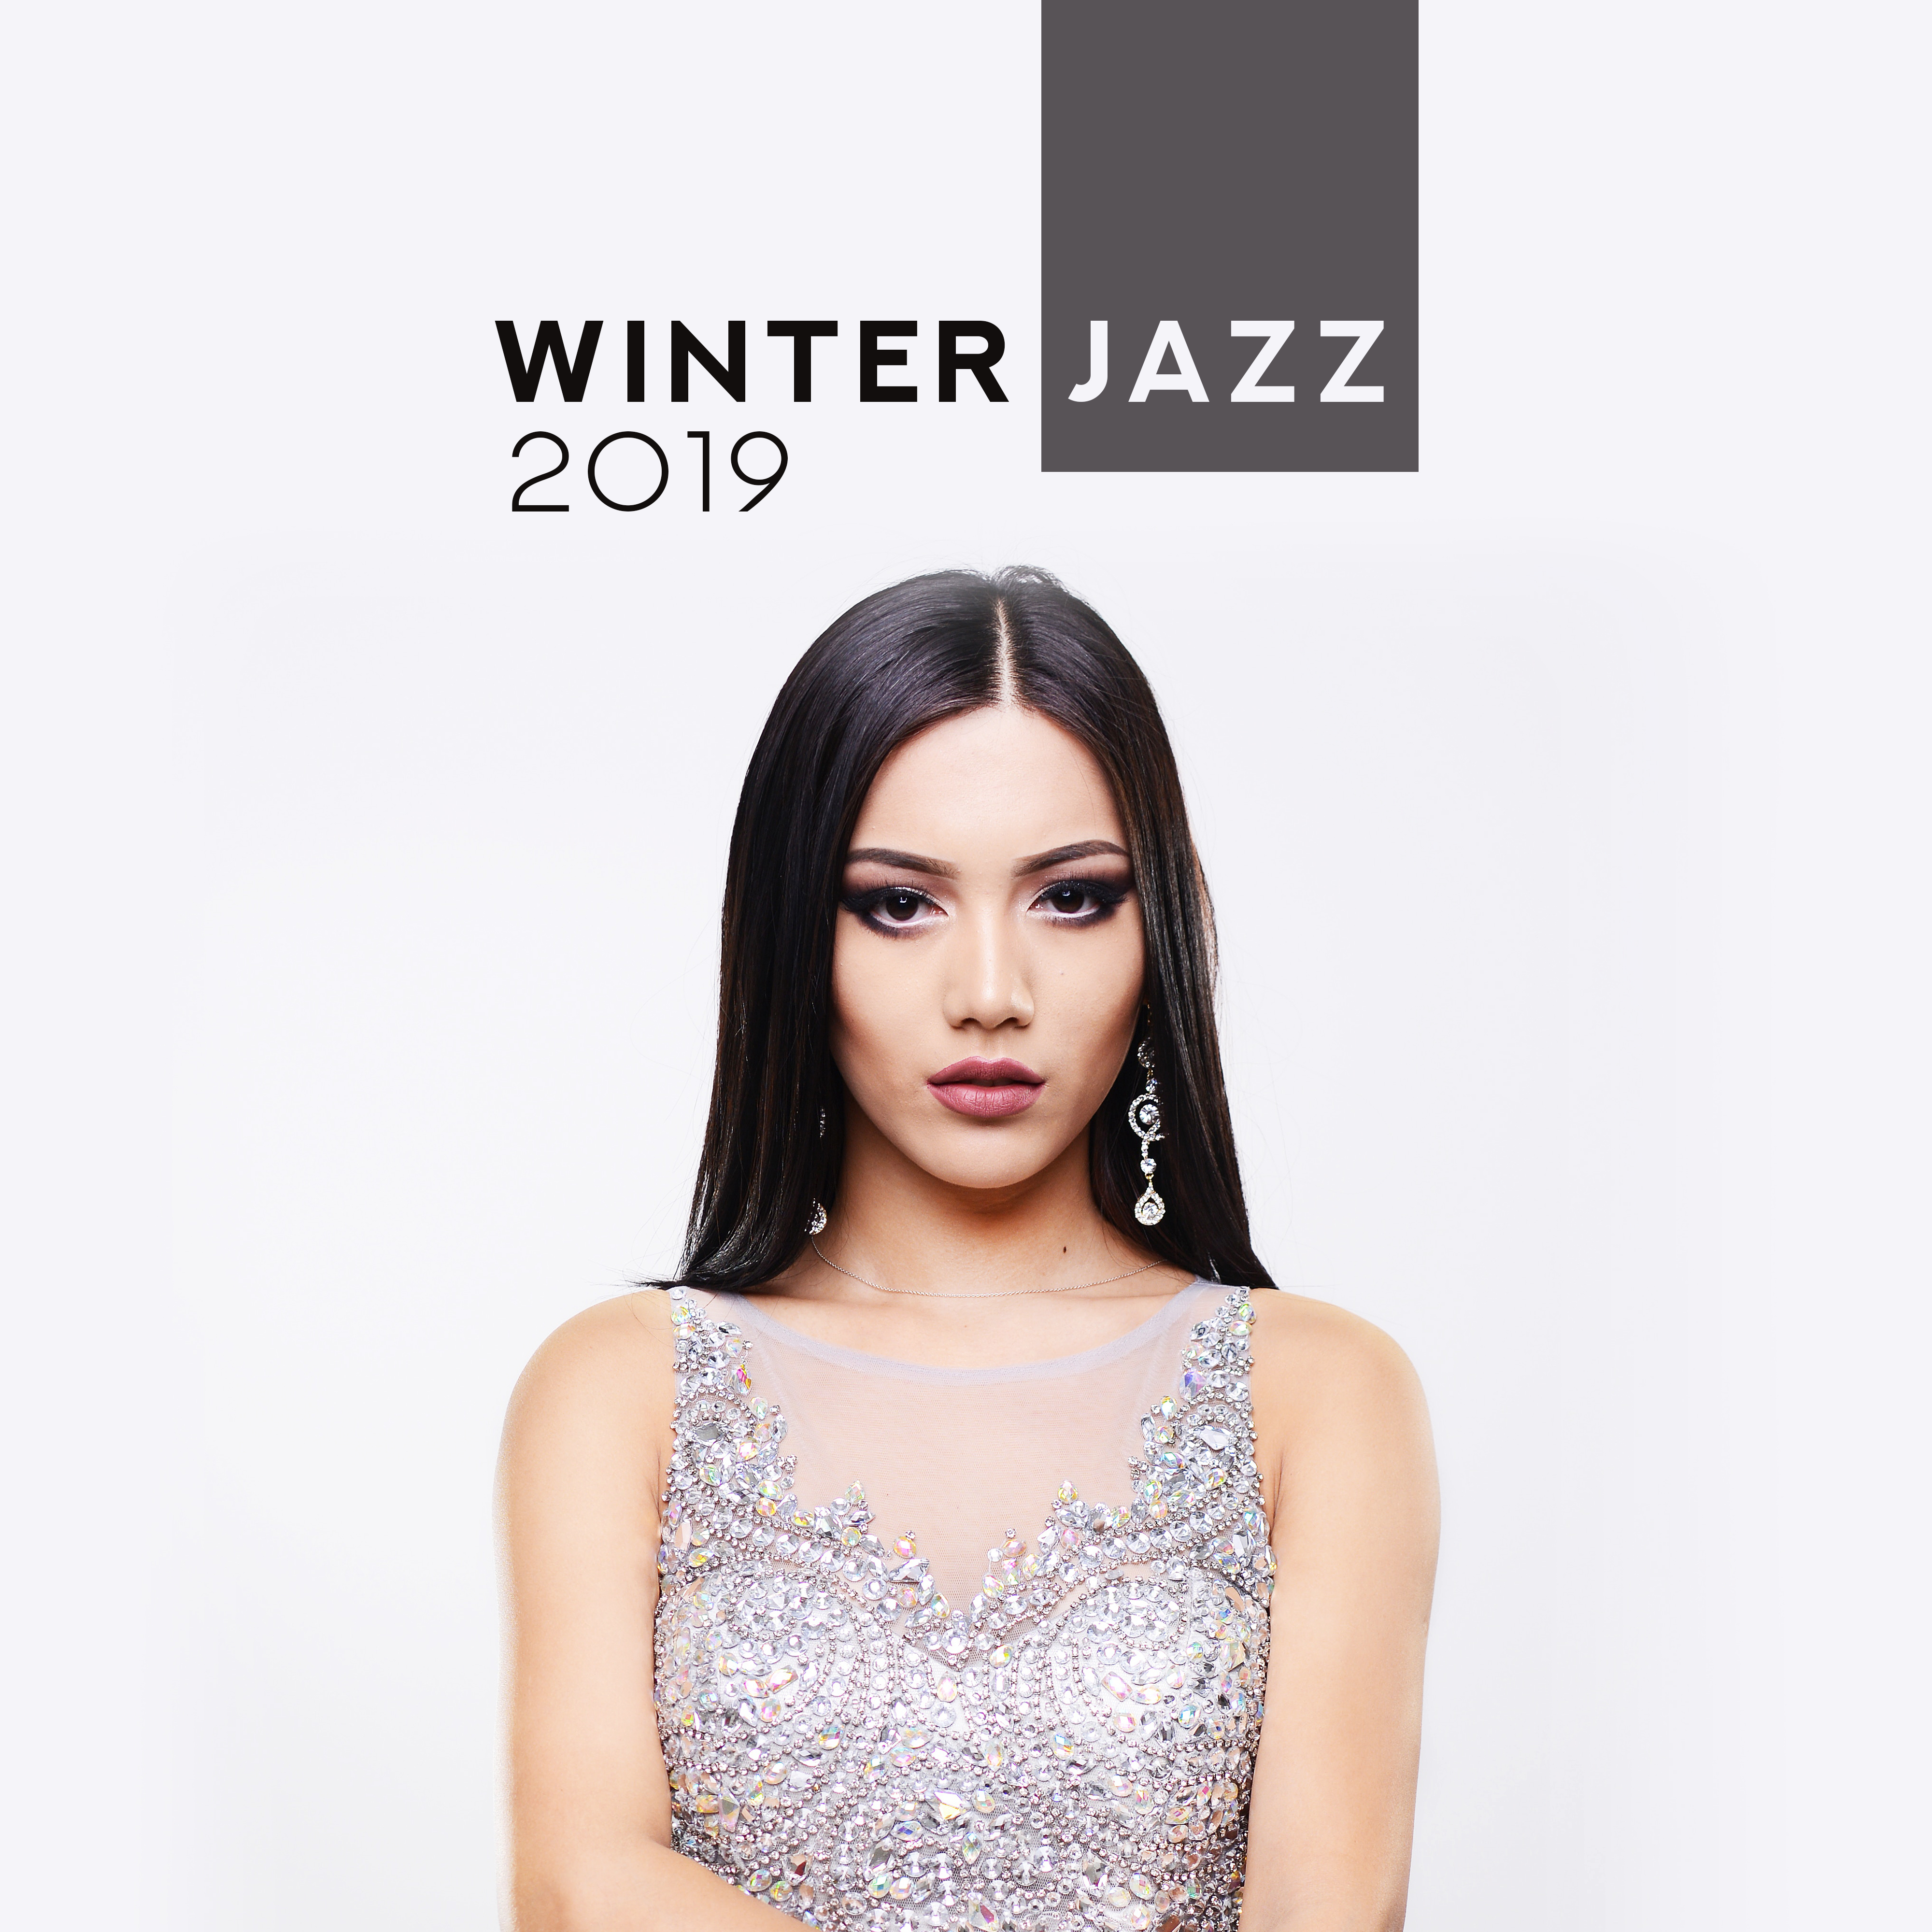 Winter Jazz 2019  Smooth Music, Lounge Jazz Coffee, Classical Jazz for Relaxation, Rest, Calm, Relaxing Jazz Songs 2019